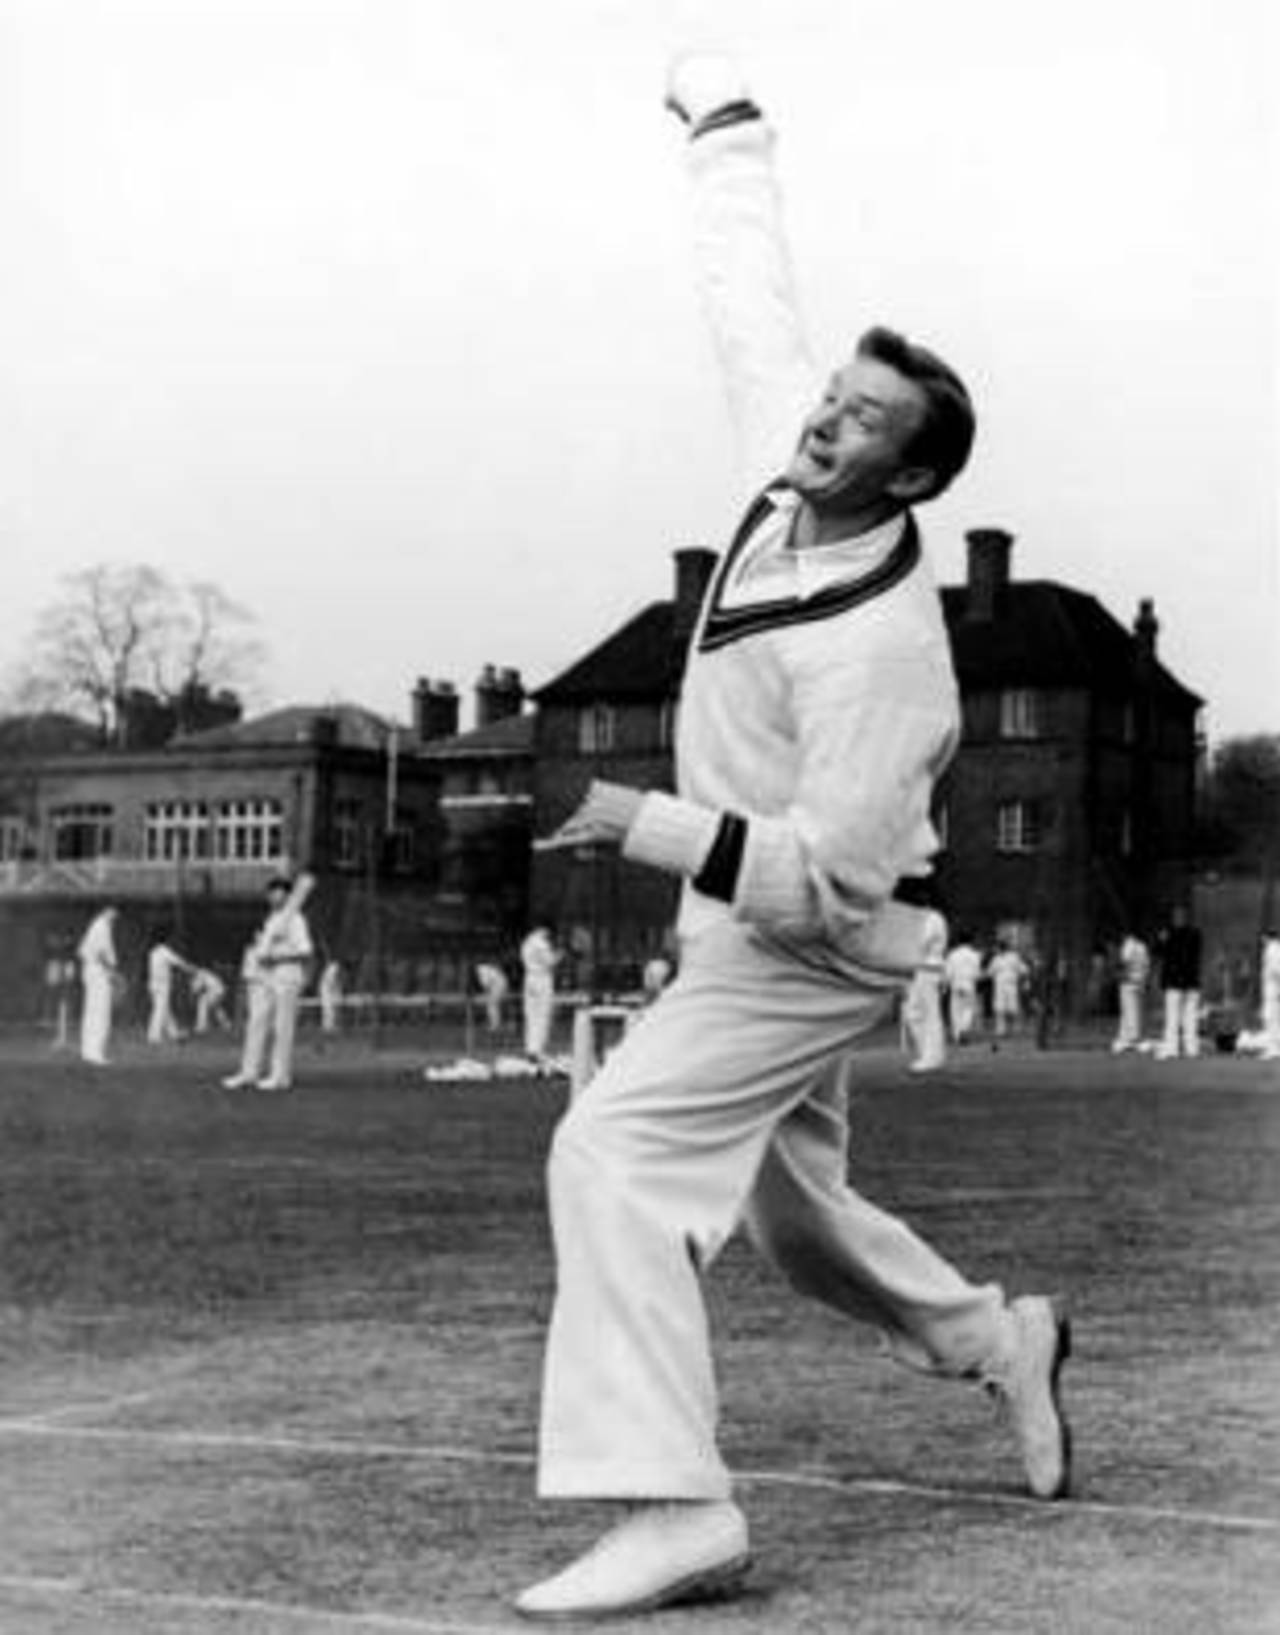 Richie Benaud bowls in the nets during Australia's 1956 tour of England

